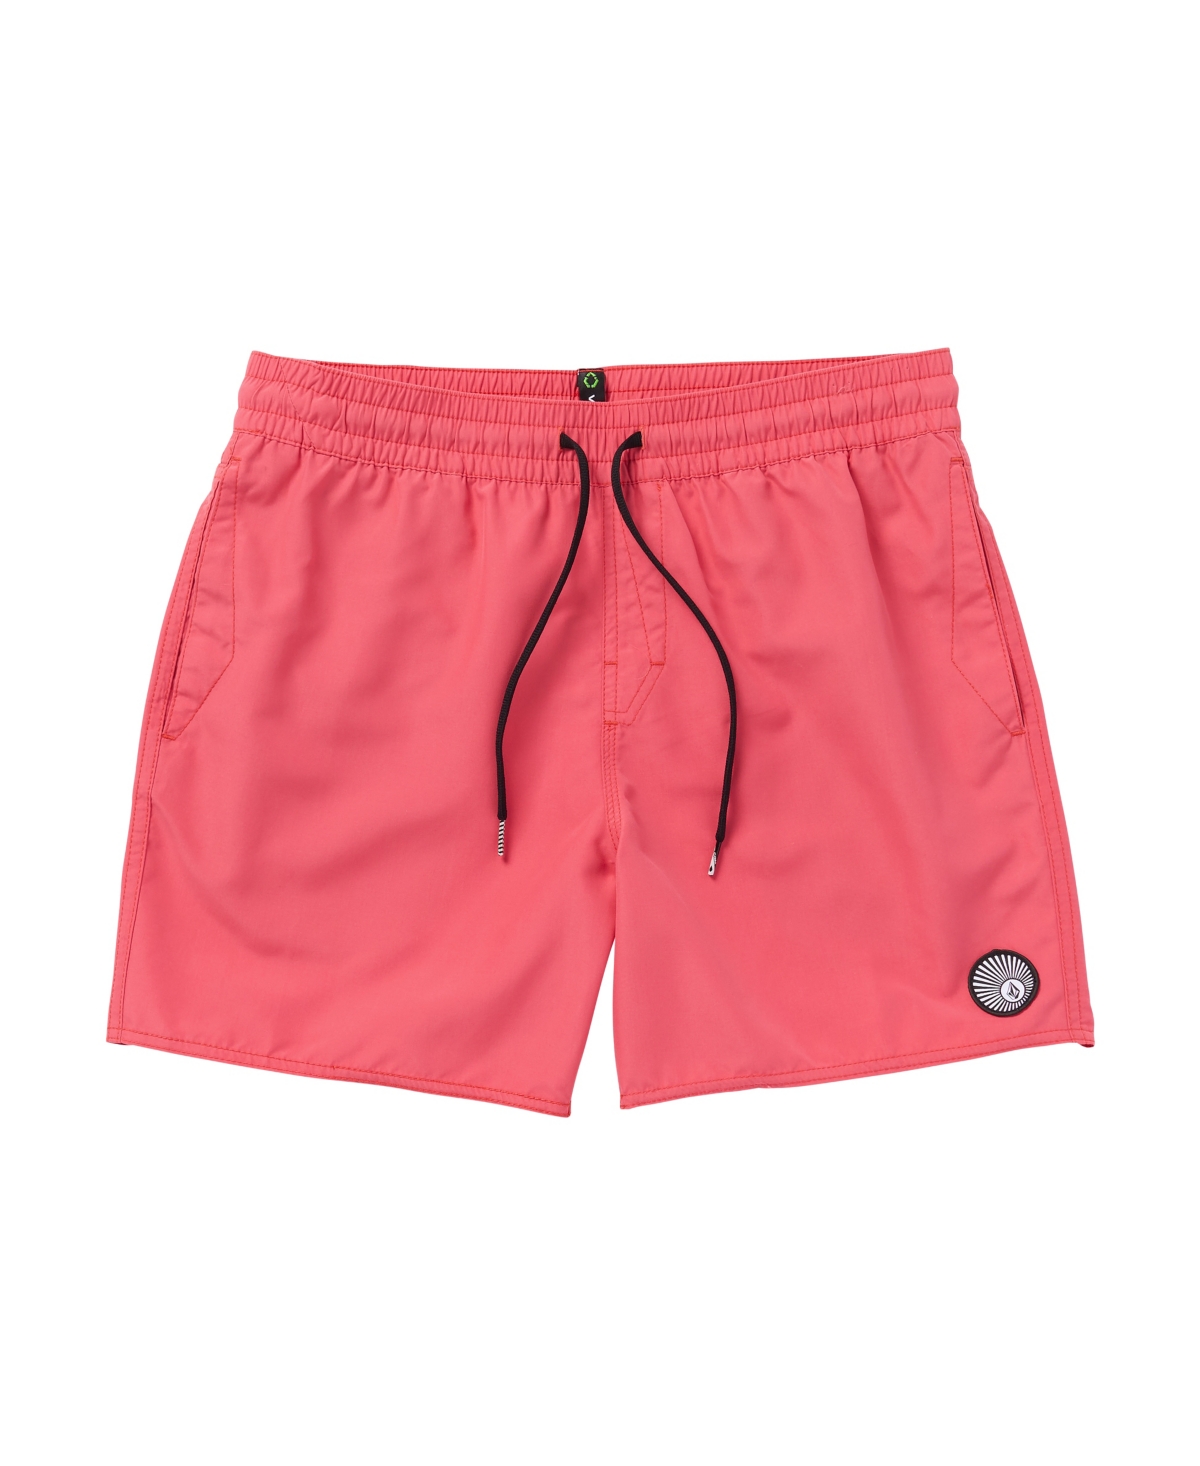 Men's Lido Solid 16" Trunk Shorts - Washed Ruby